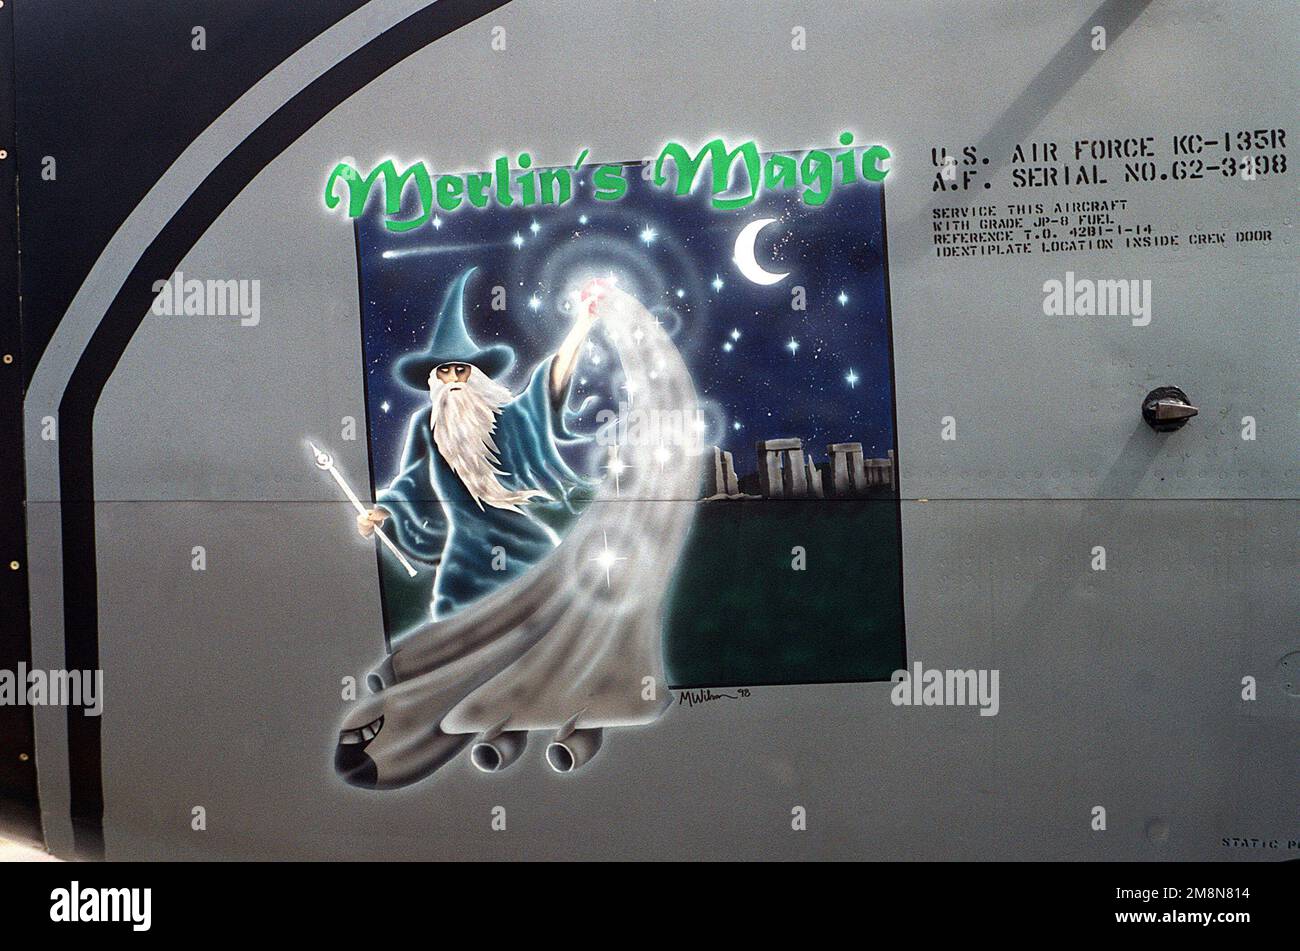 Suffolk County, England. 'Merlin's Magic' nose art on a KC-135R Stratotanker aircraft, serial number 62-3498, assigned to the 100th Air Refueling Wing, Royal Air Force (RAF) Mildenhall. The artist is STAFF Sergeant Charles Hatton, assigned to the 100th Aircraft Generation Squadron. Base: Raf Mildenhall Country: Great Britain / England (GBR) Stock Photo